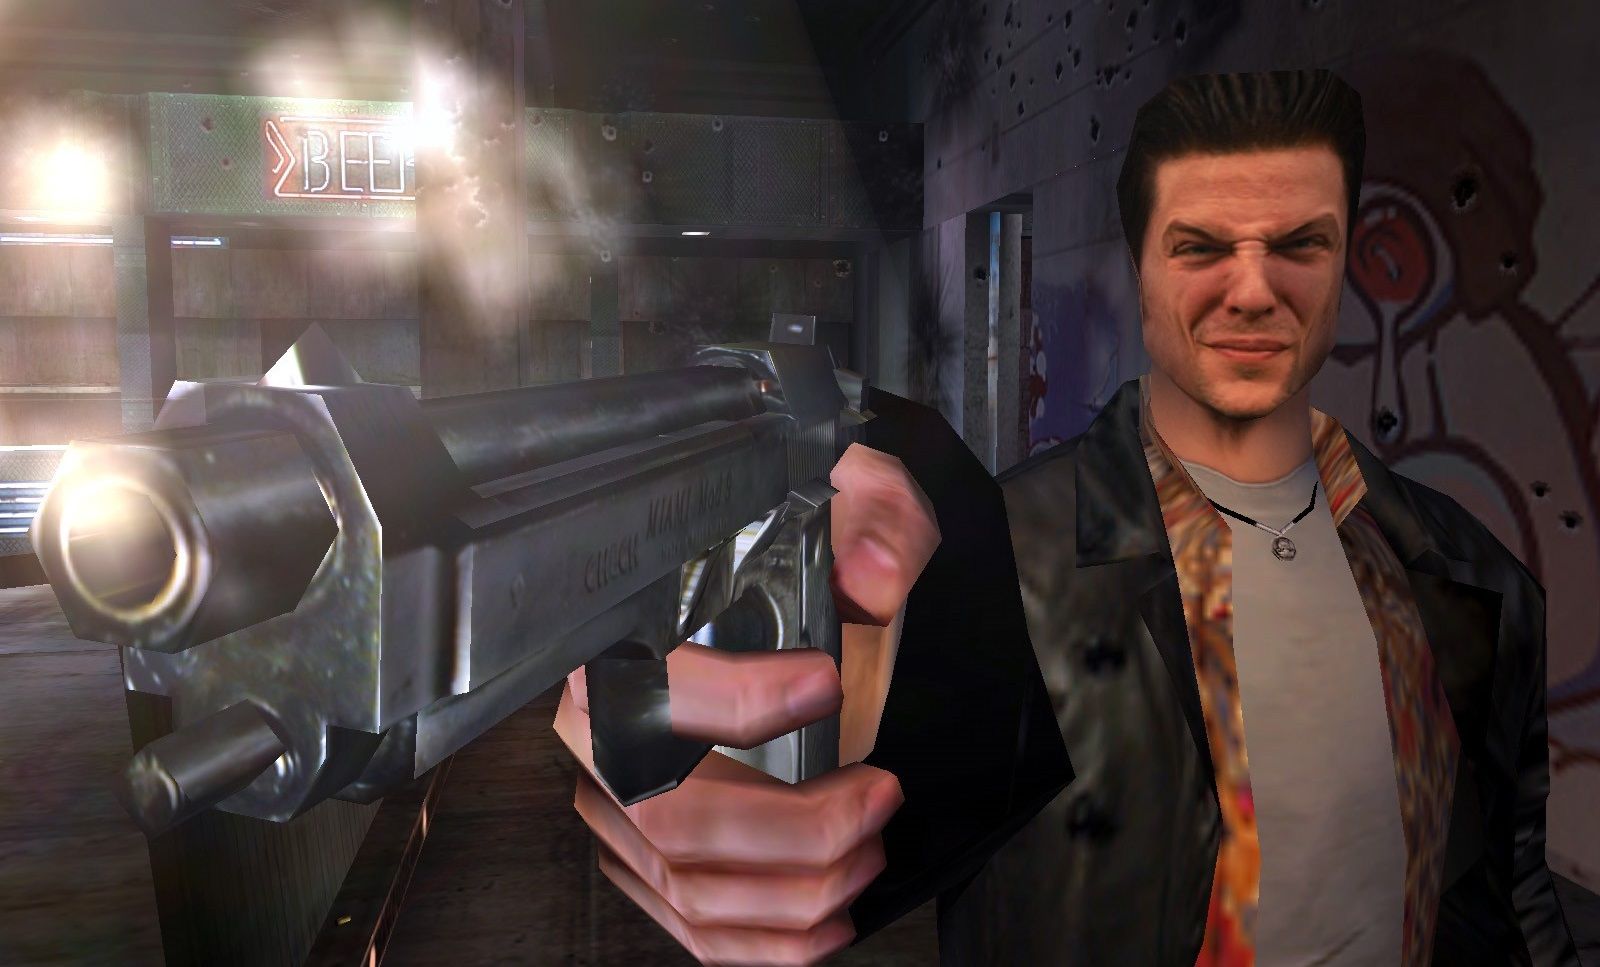 the max payne remake is likely years away, but one ambitious modder cranked out an 'rtx on' remaster of the original game's first level